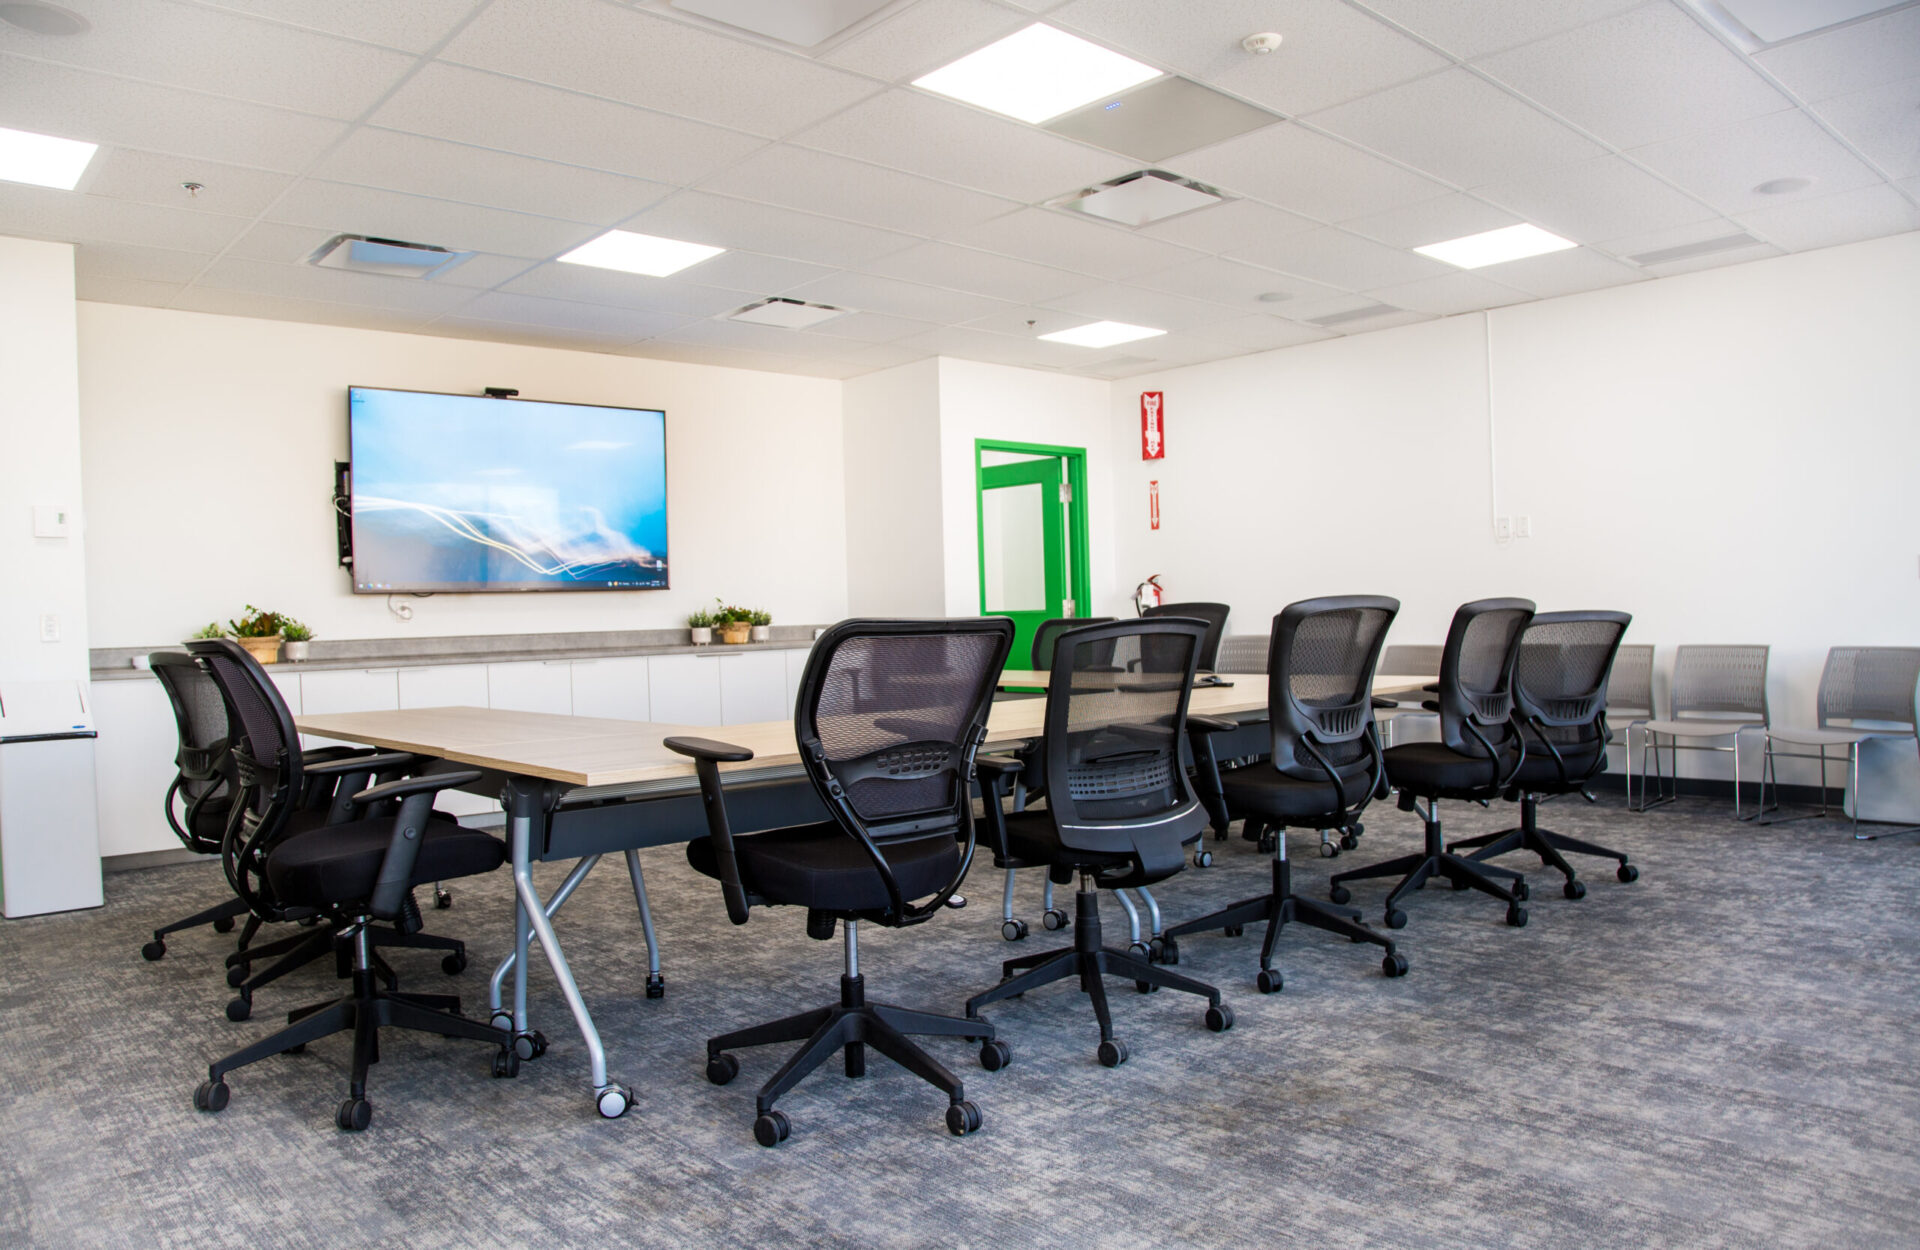 A conference room designed for engineering and architecture discussions, equipped with a table and chairs.